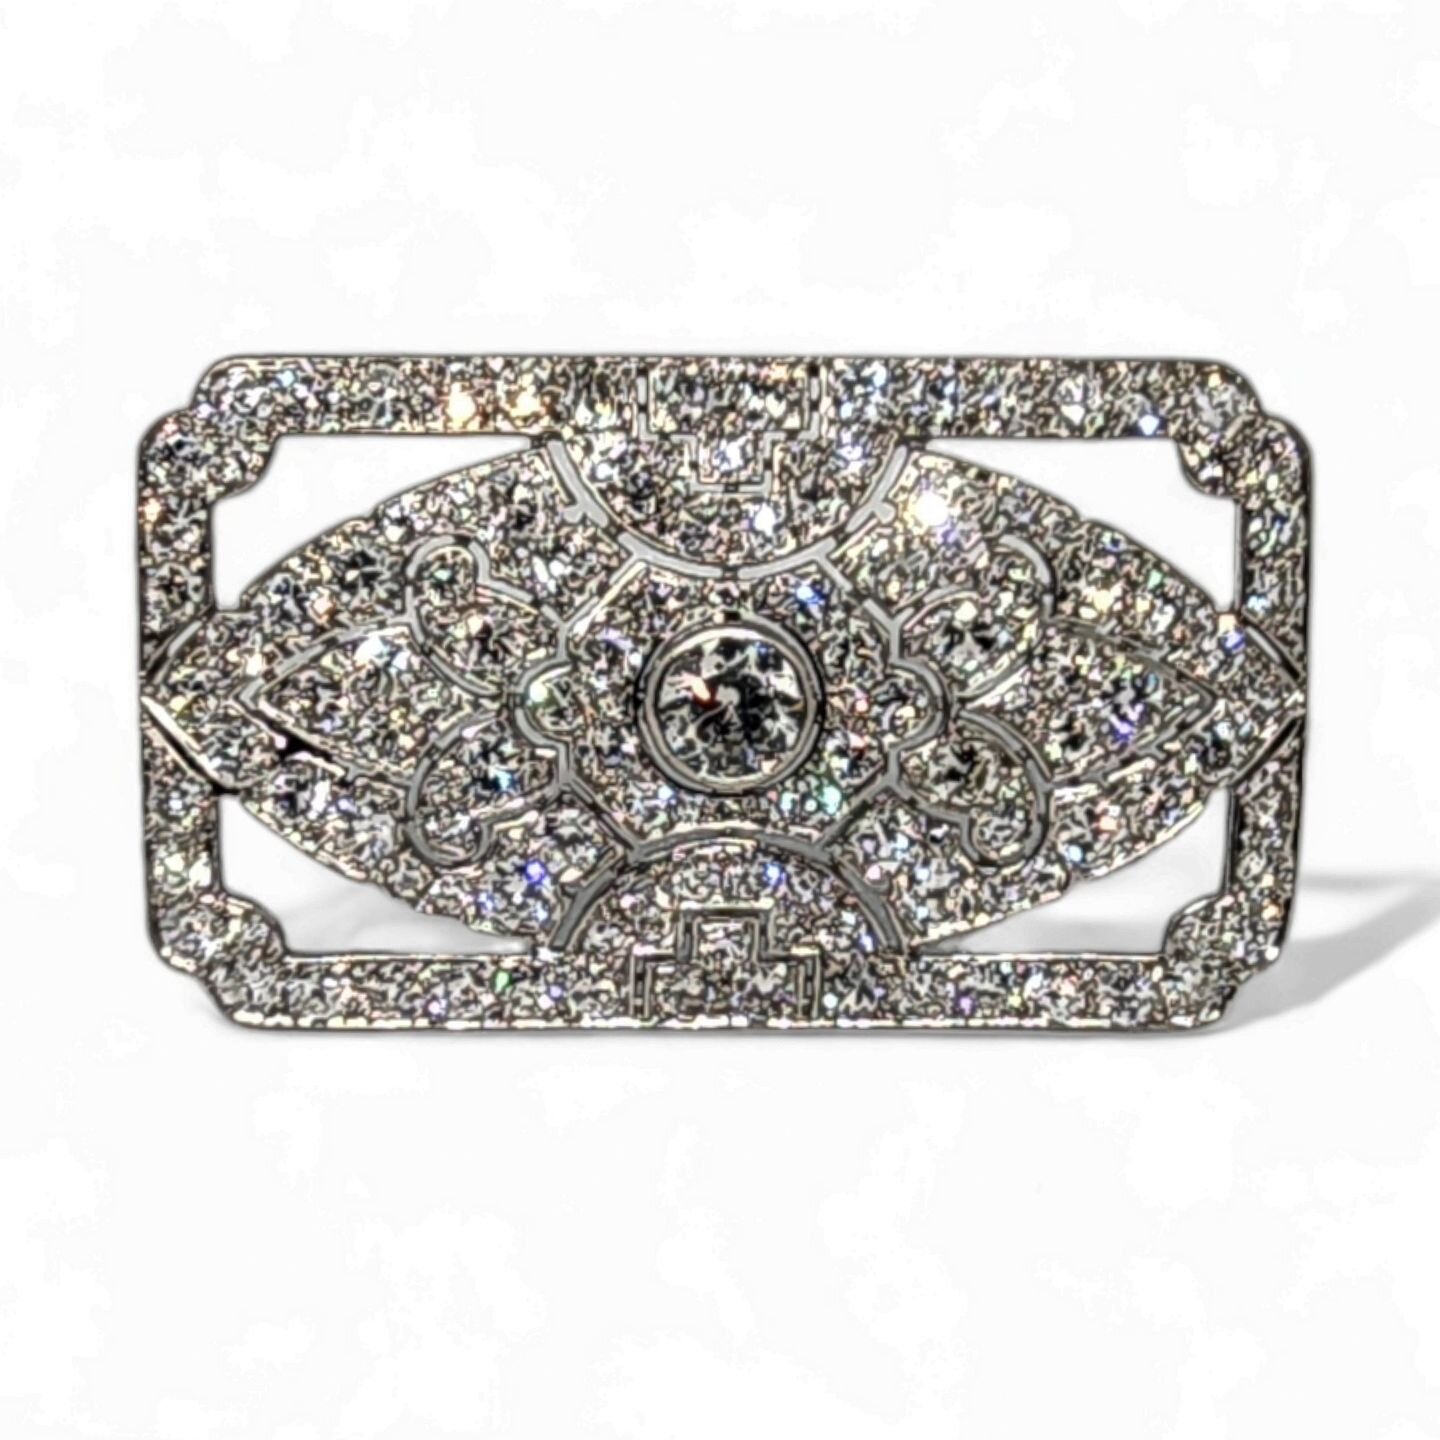 A wonderful example of early art deco jewelry, this platinum and diamond rectangular plaque brooch by Mauboussin.
France, 1920's.

#ai_sold
#artsinternational
#artdecojewels
#artdeco
#signedjewelry
#mauboussin
#frenchjewelry
#antiquejewellery
#antiqu